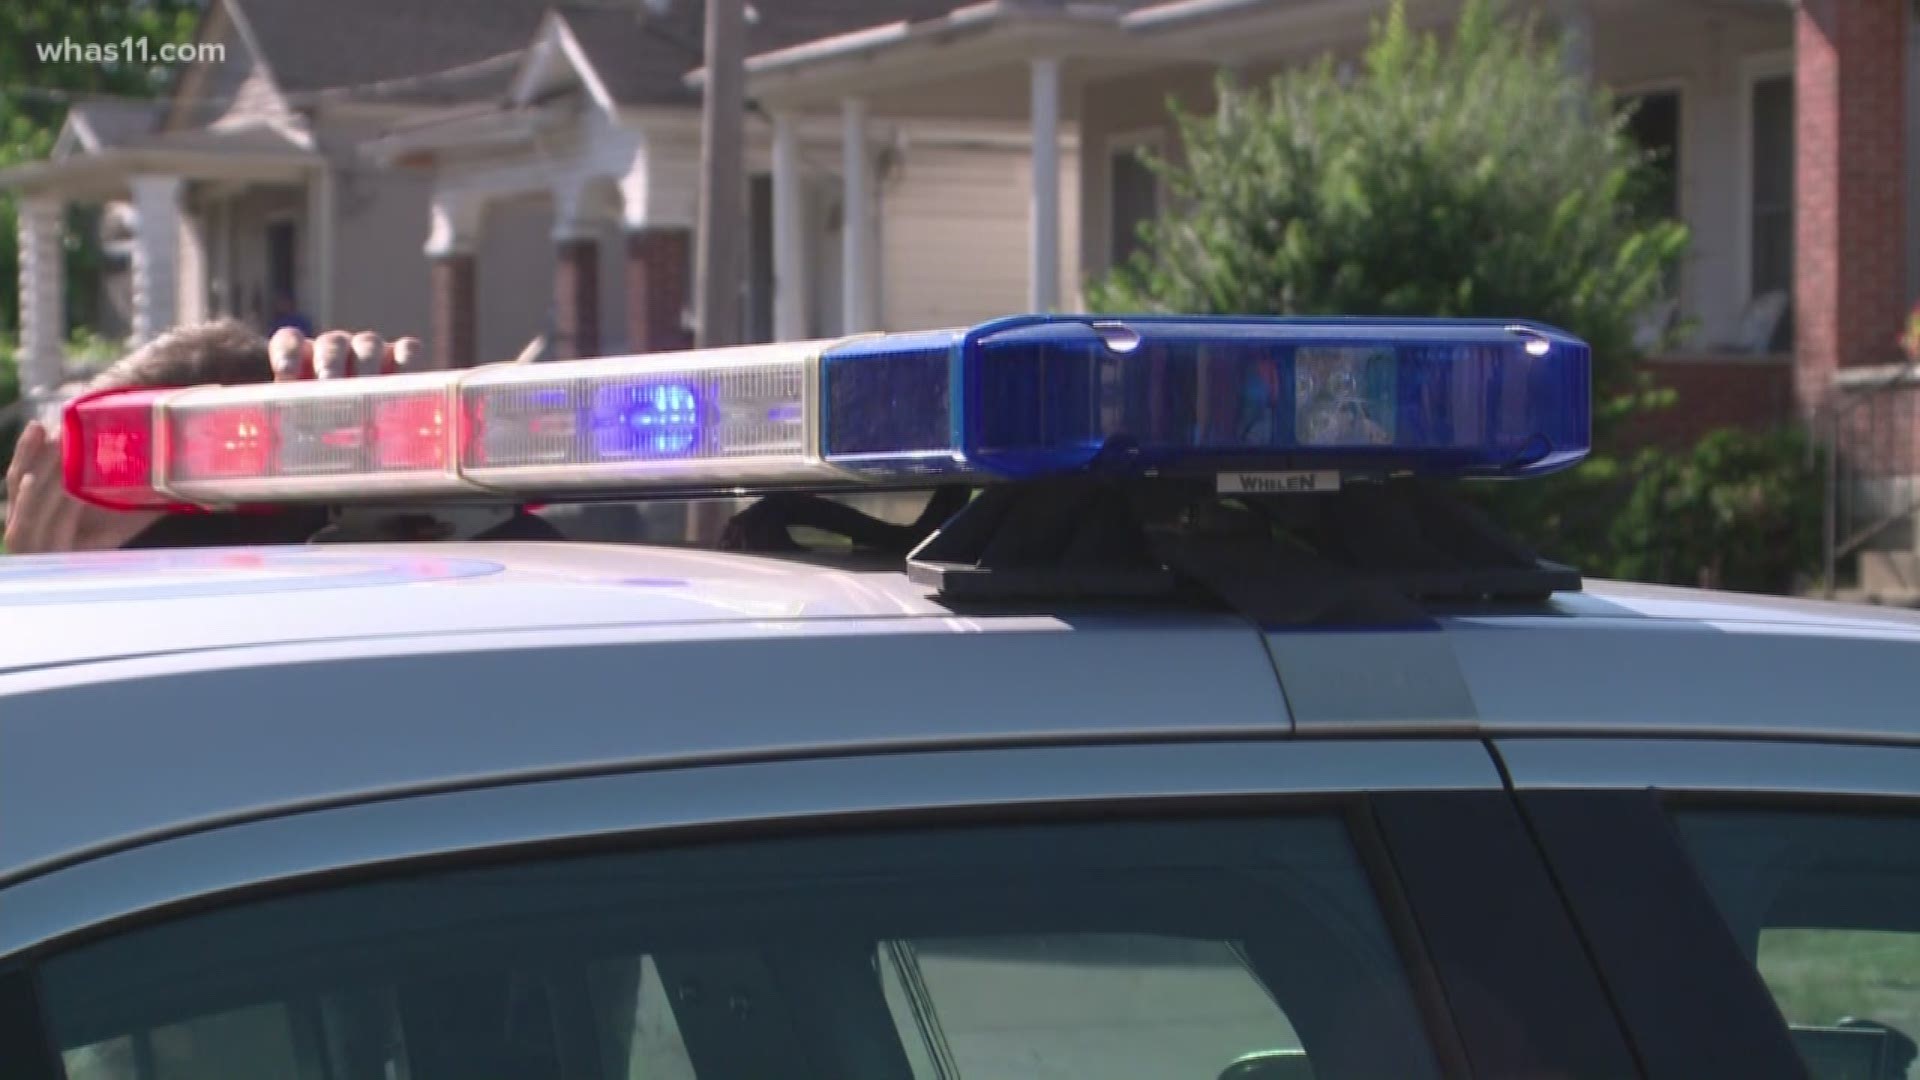 Police say a woman who is 7 months pregnant in her apartment when they arrived on the scene